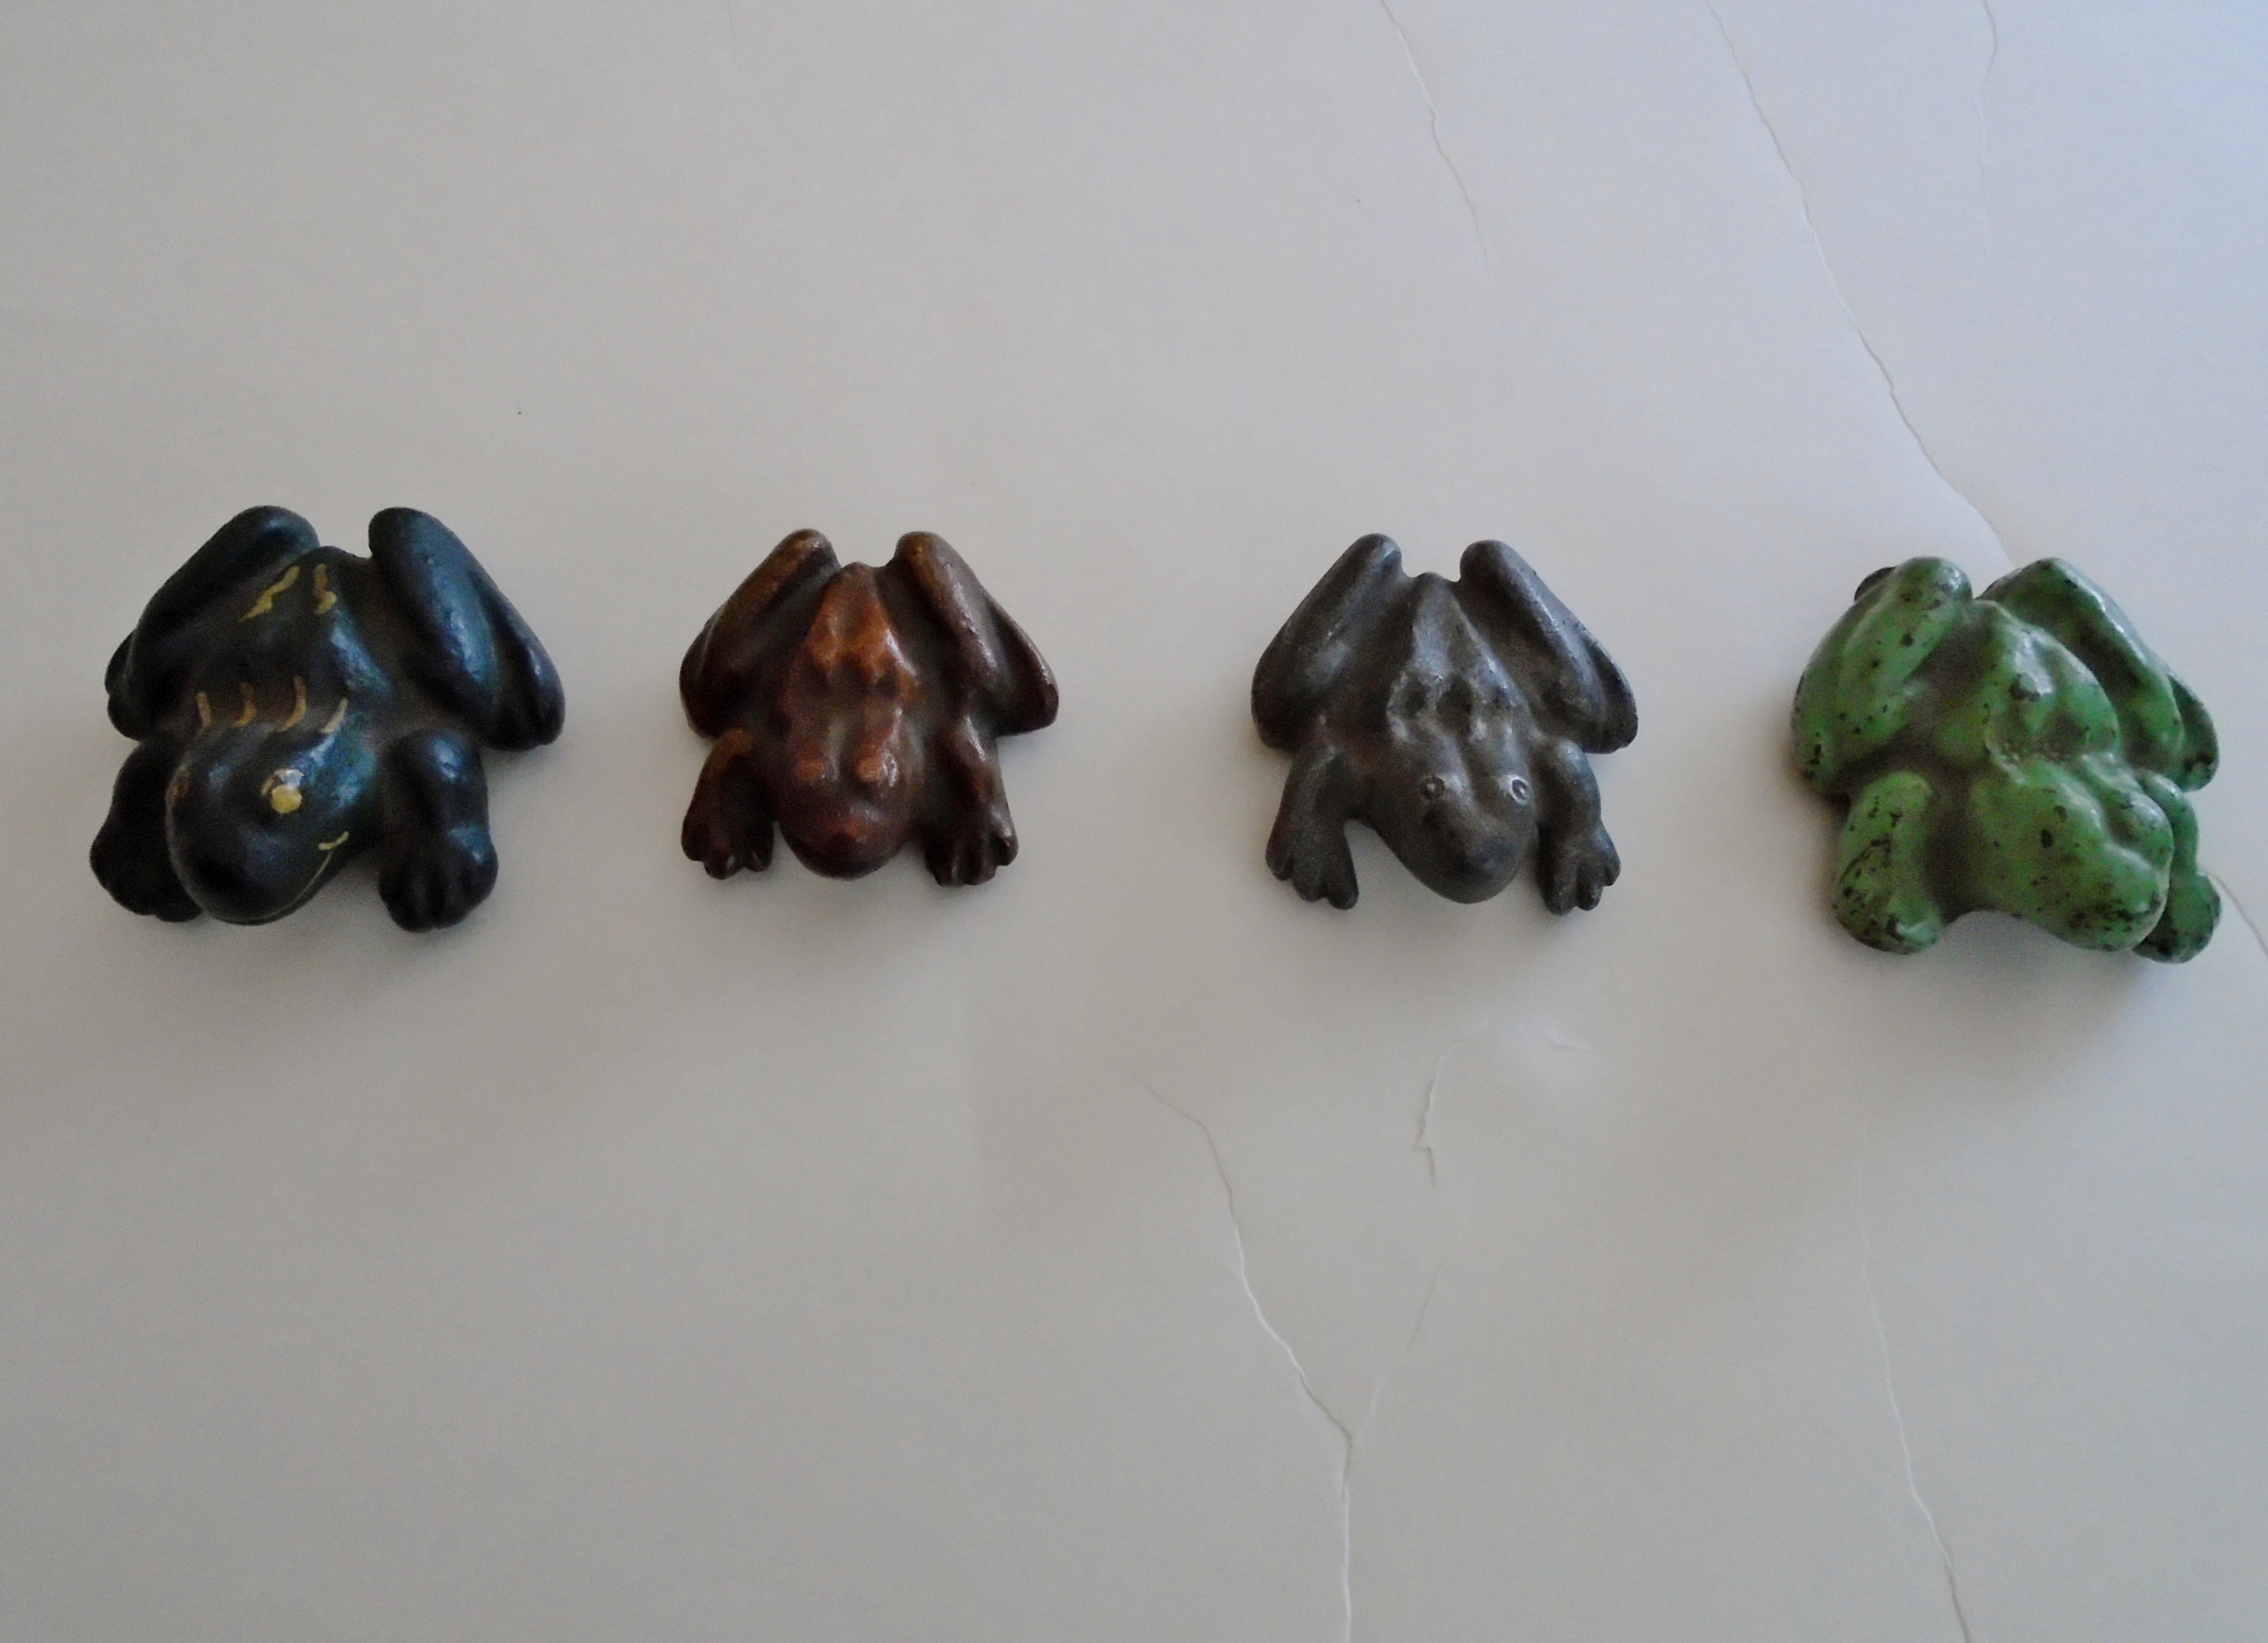 4 MALE FROGS IN DIFFERENT PAINT